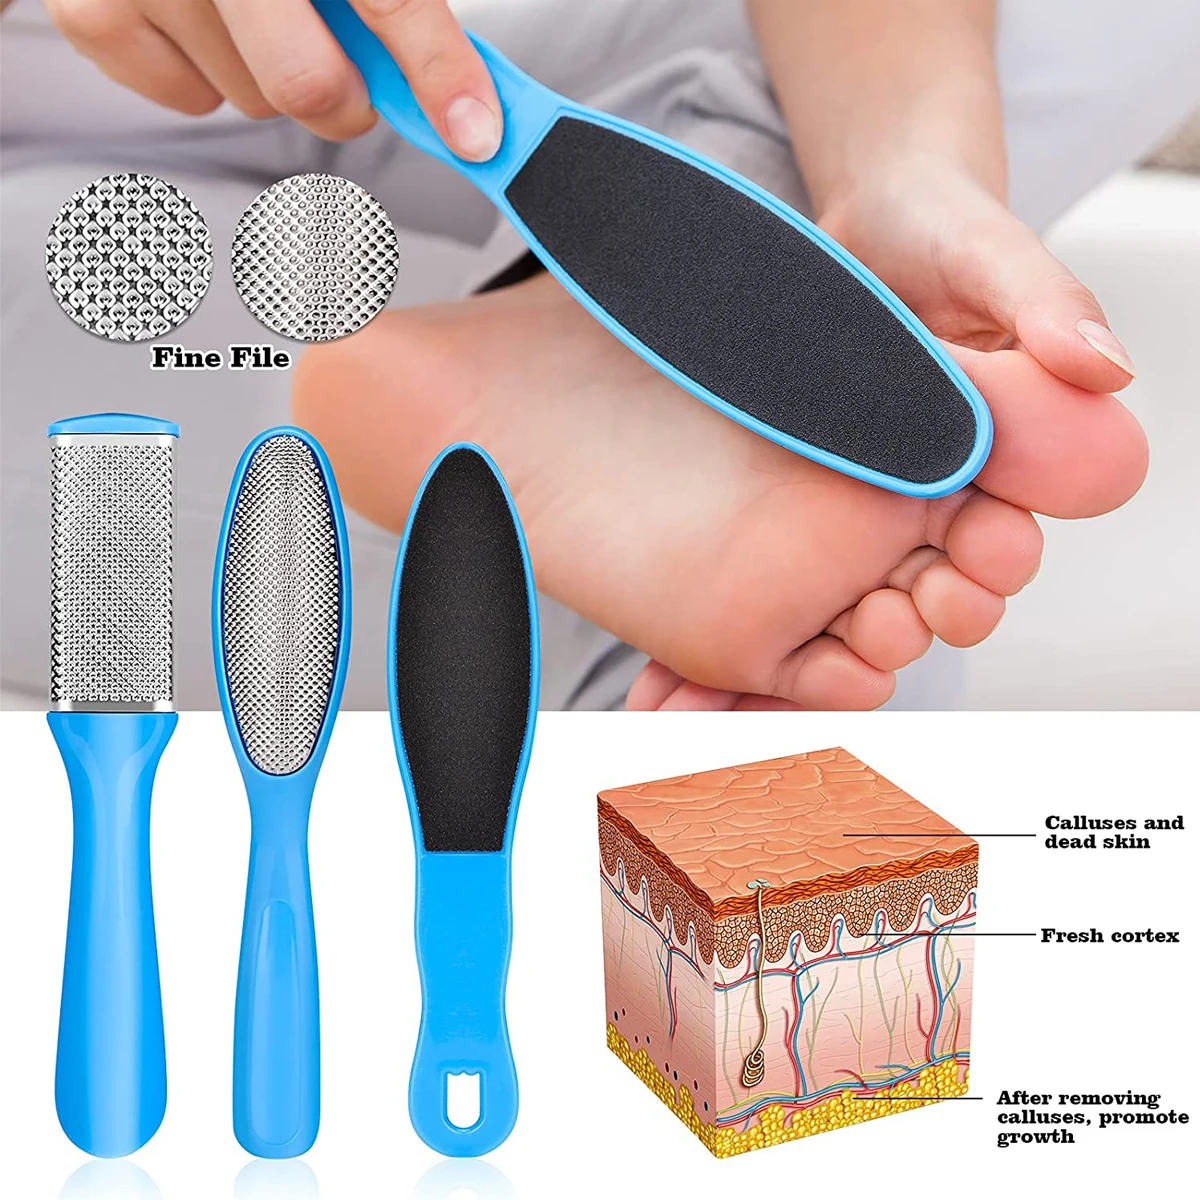 https://ae01.alicdn.com/kf/S1d51eff1d971460787f743b4623cc8f3U/Pedicure-Set-Peeling-and-Exfoliating-Calluses-Foot-Scrubbing-Brush-Stainless-Steel-Double-sided-Foot-Care-Pedal.jpg